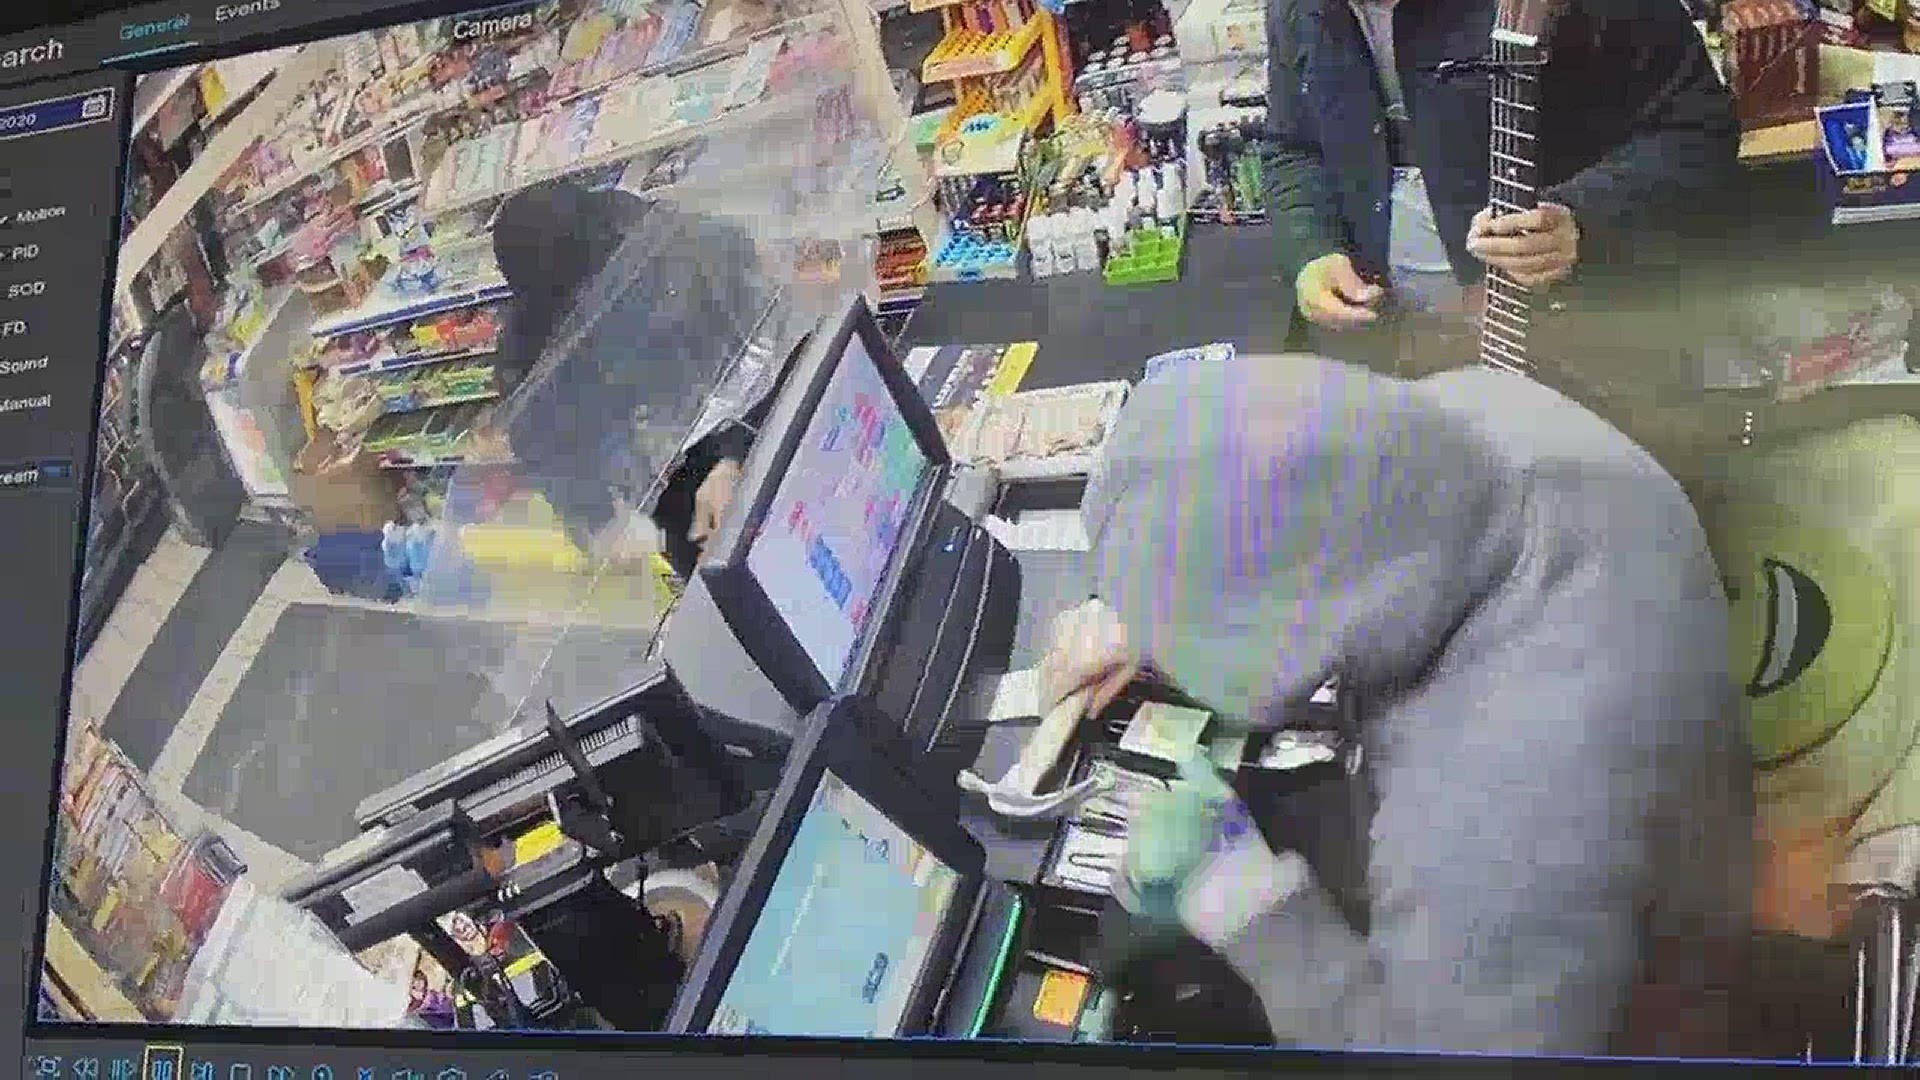 Security camera video and images show the robbery last month, including a distictive tattoo on one of the robbers.